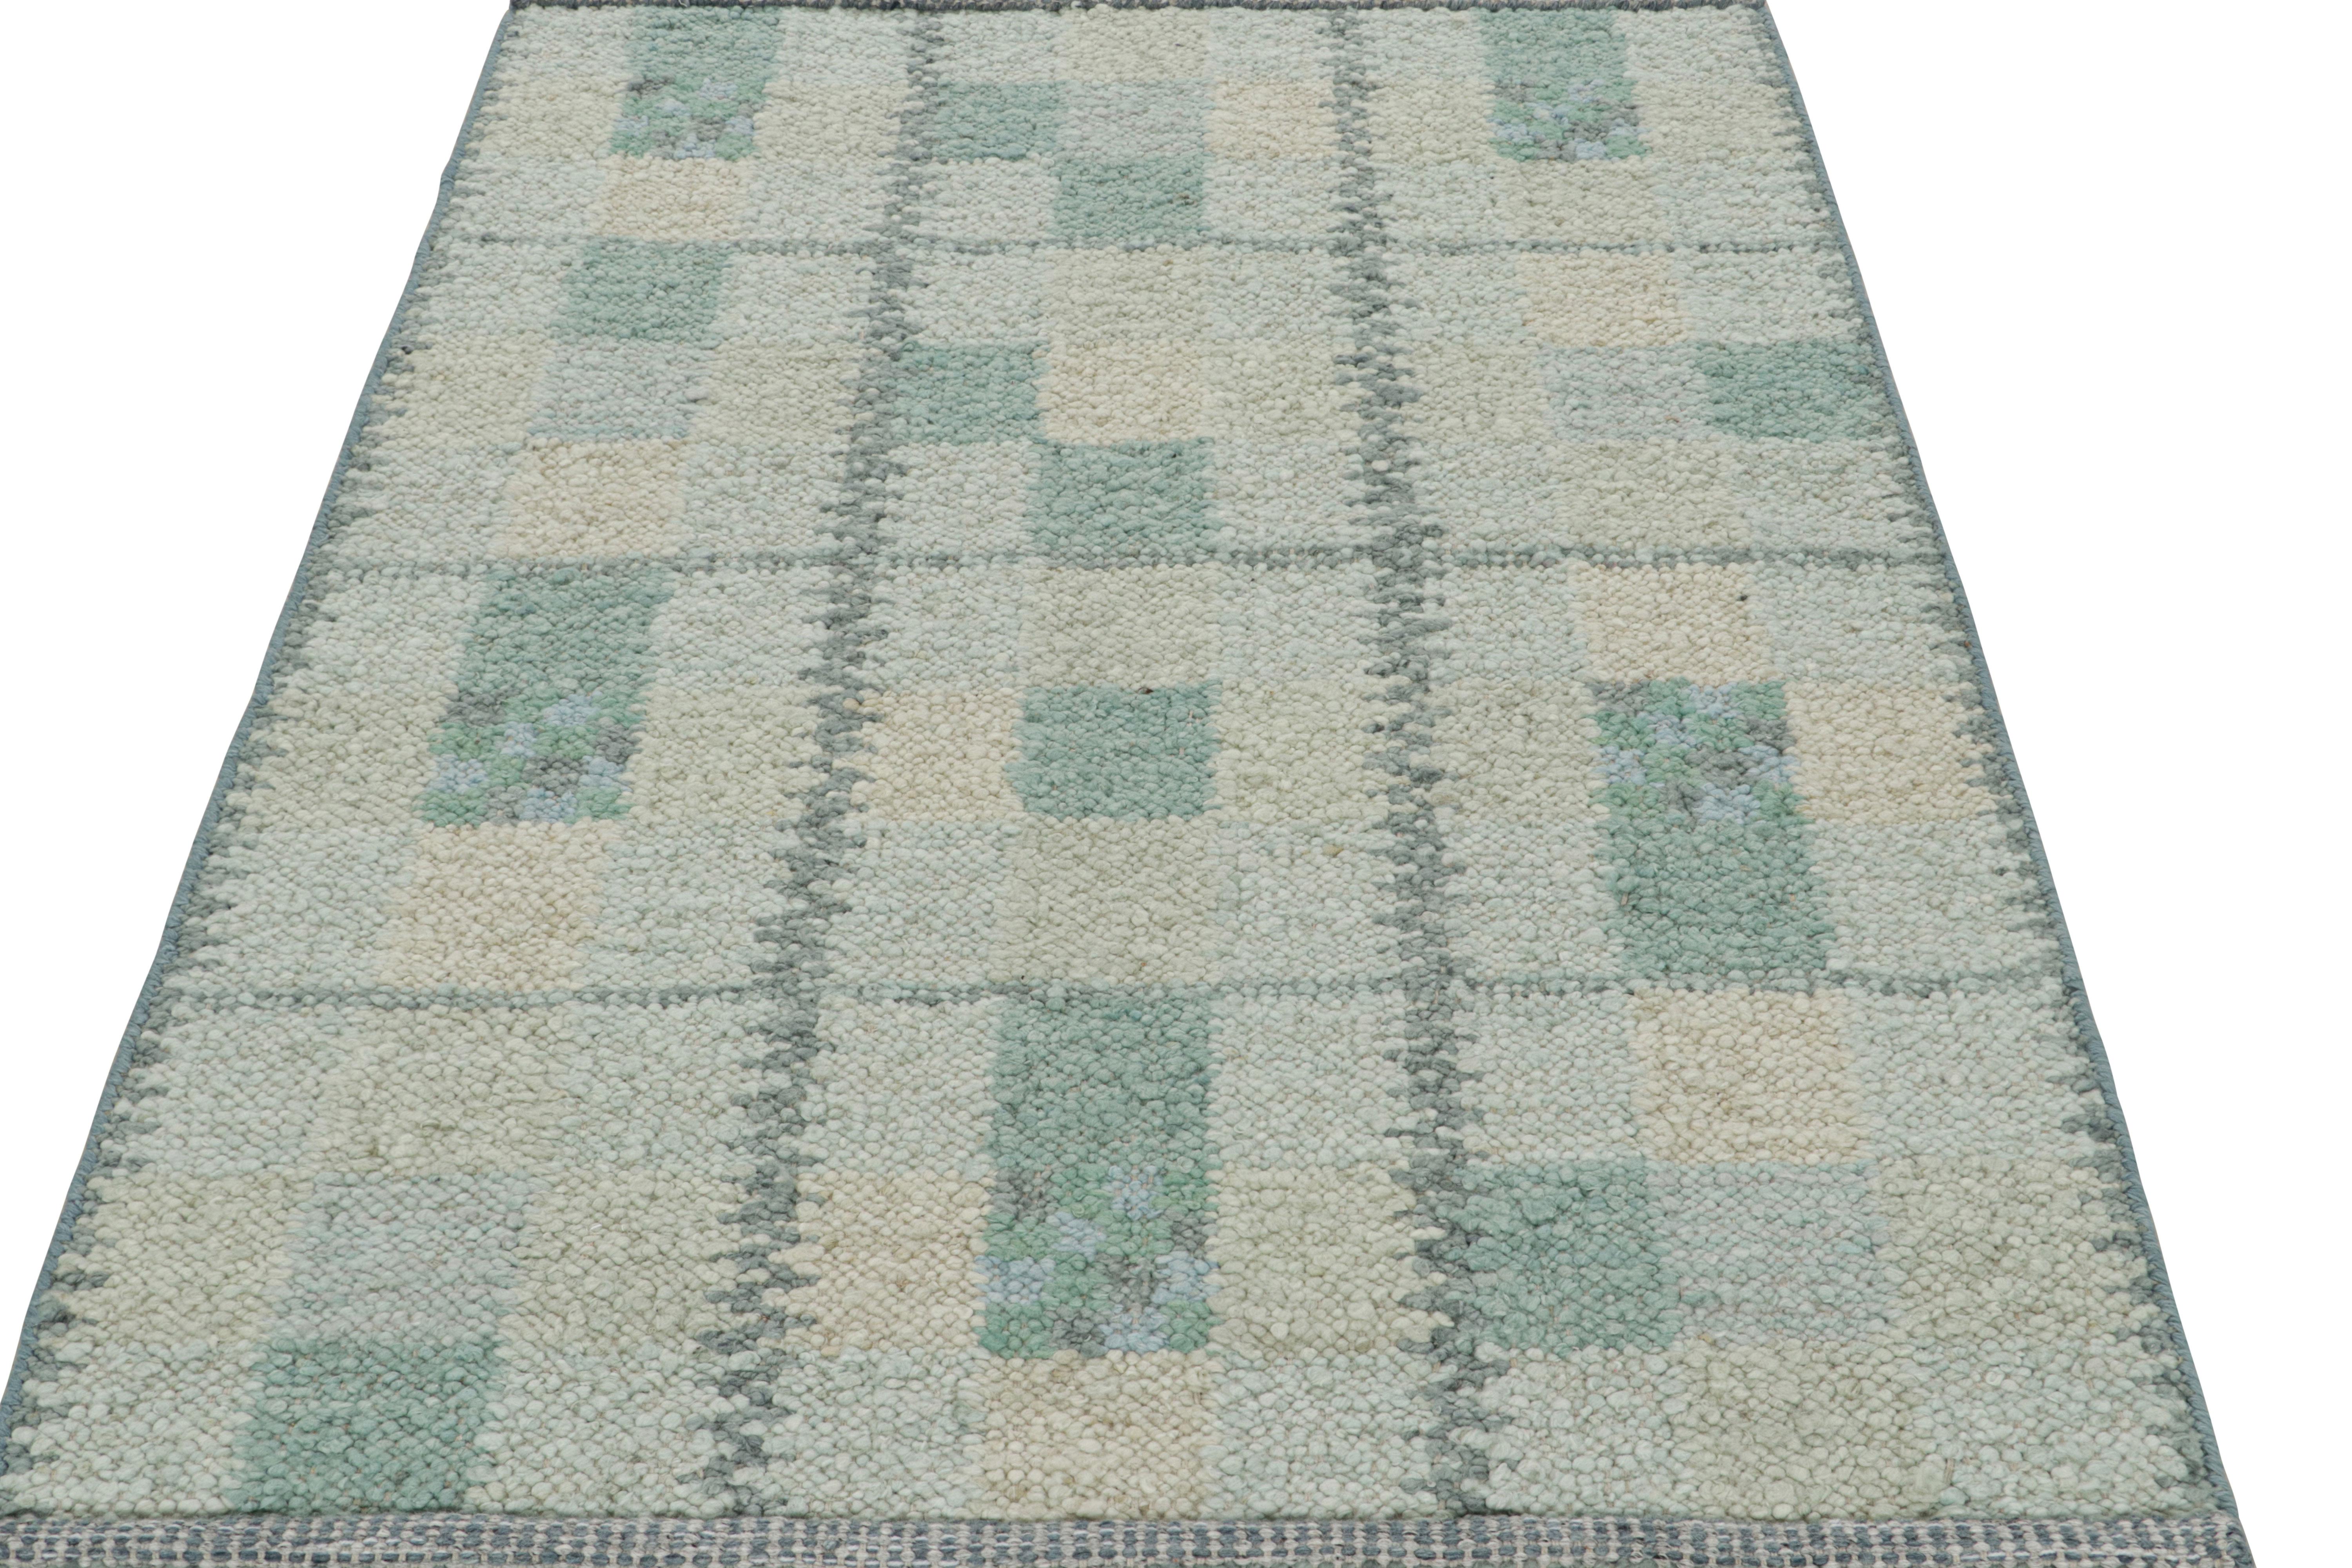 Indian Rug & Kilim’s Scandinavian Rug in Seafoam Green and Teal Blue Geometric Patterns For Sale